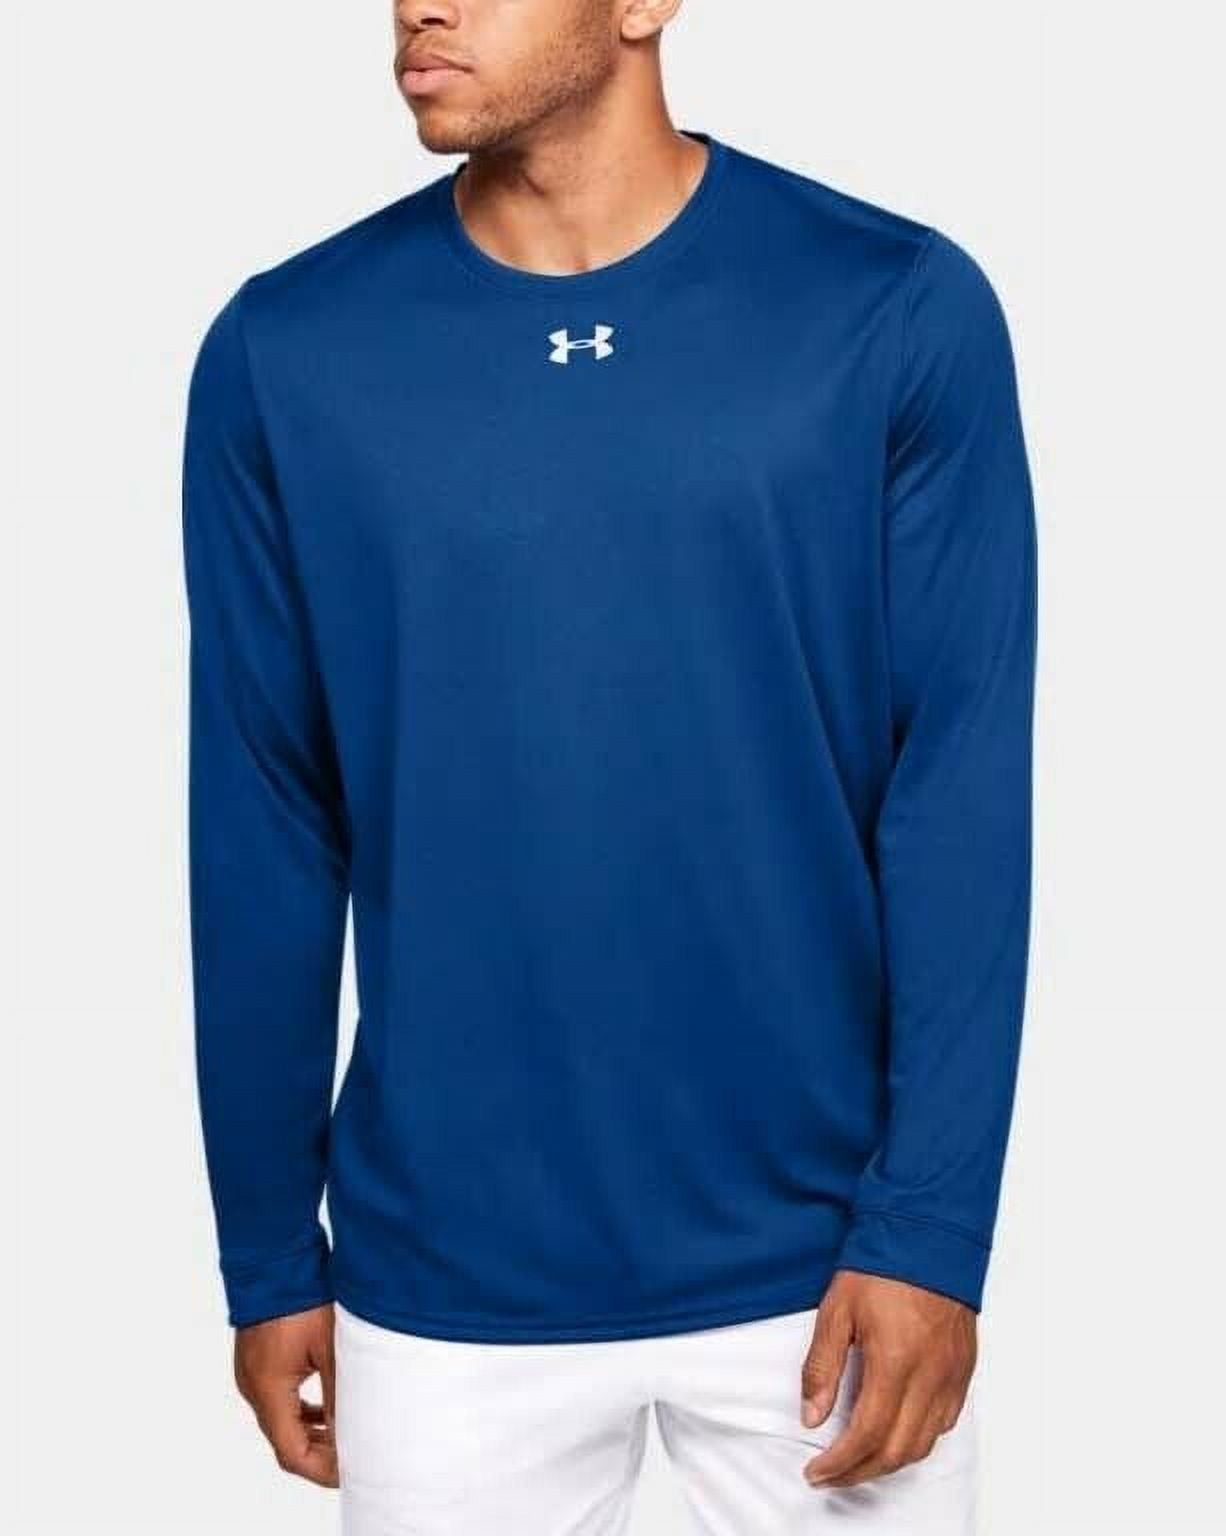 NWT Under Armour Mens SZ MED All Season Gear Loose Fit Blue/ Gray Thermal  Shirt